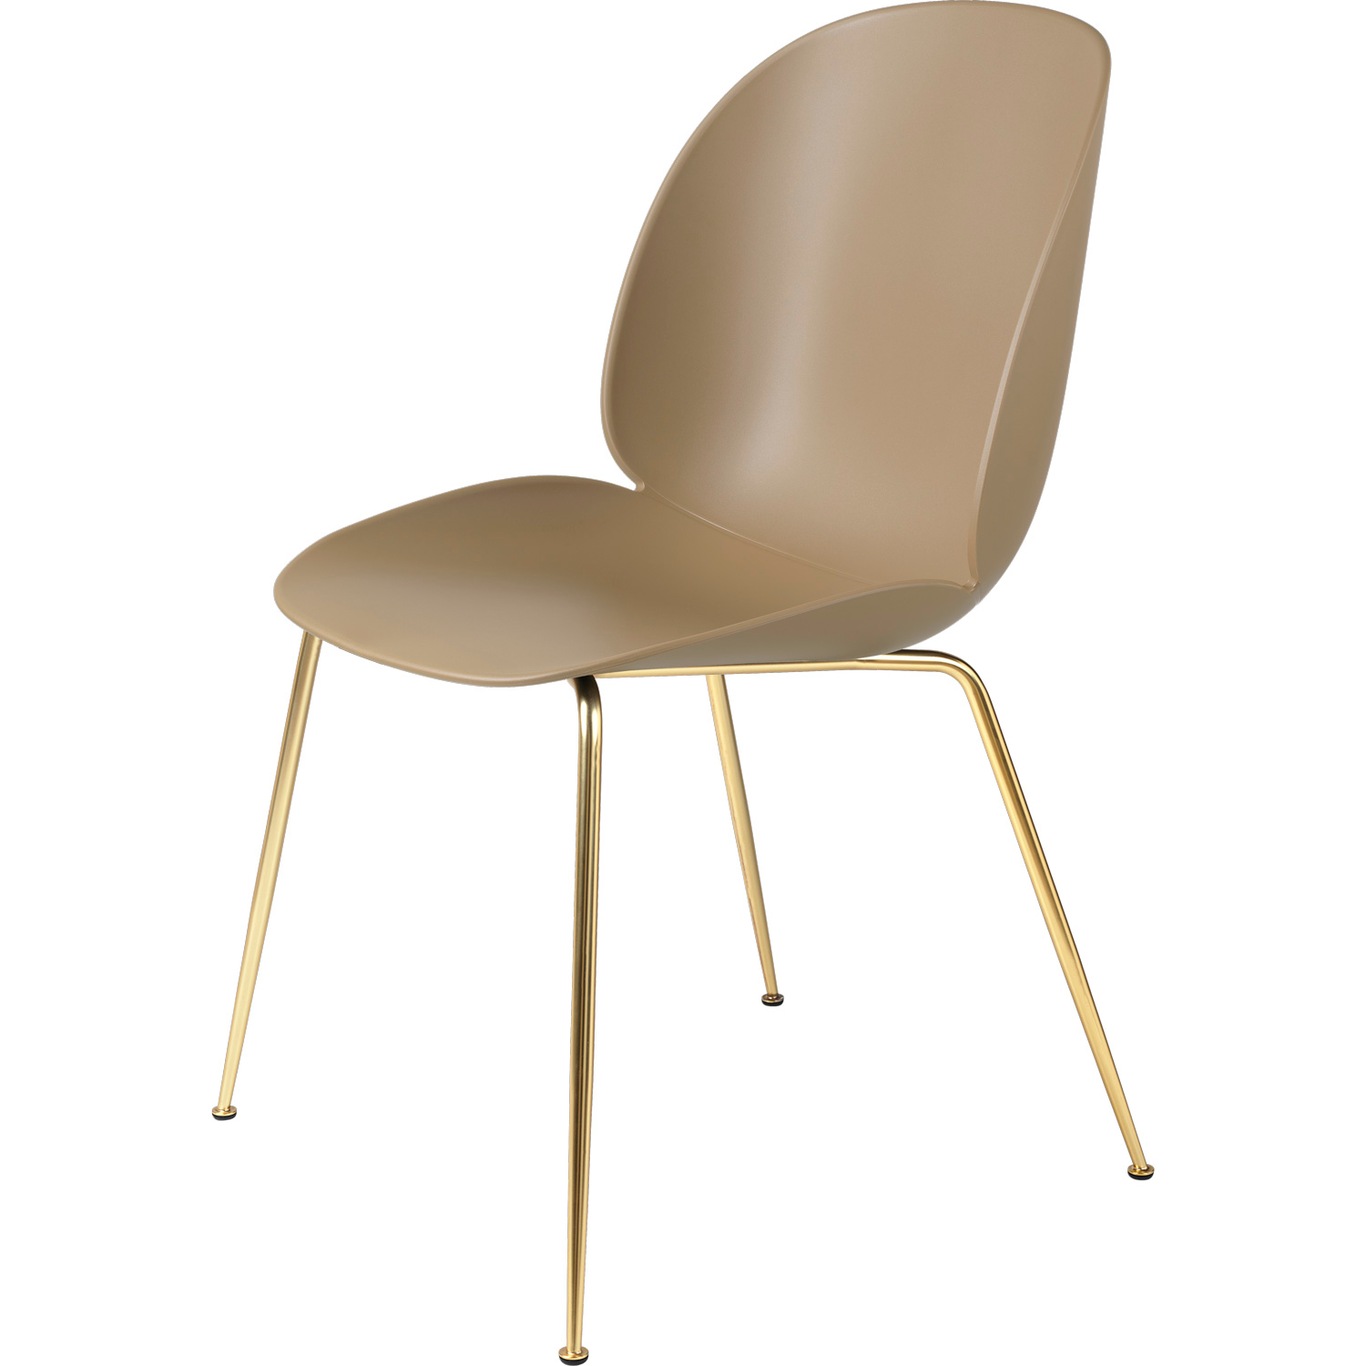 Beetle Dining Chair Un-upholstered, Conic Base Brass, Pebble Brown